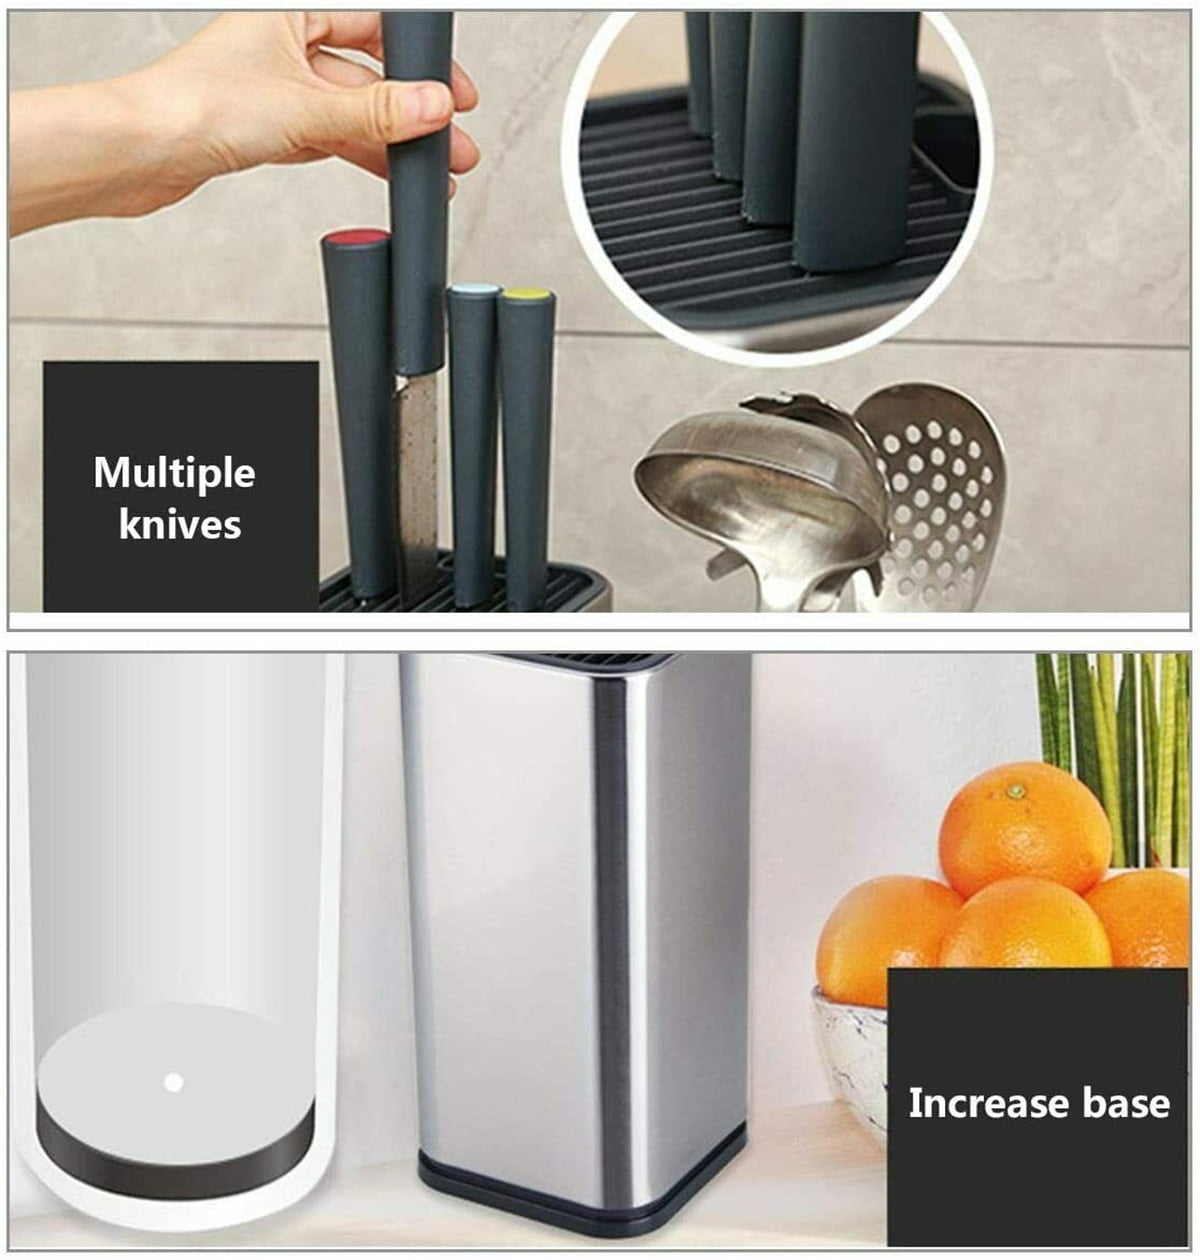 OOU Universal Knife Block Holder - Round Kitchen Knife Storage Unique Slot  Design to Protect Blades, Space Saver Knife Organizer Detachable for Easy